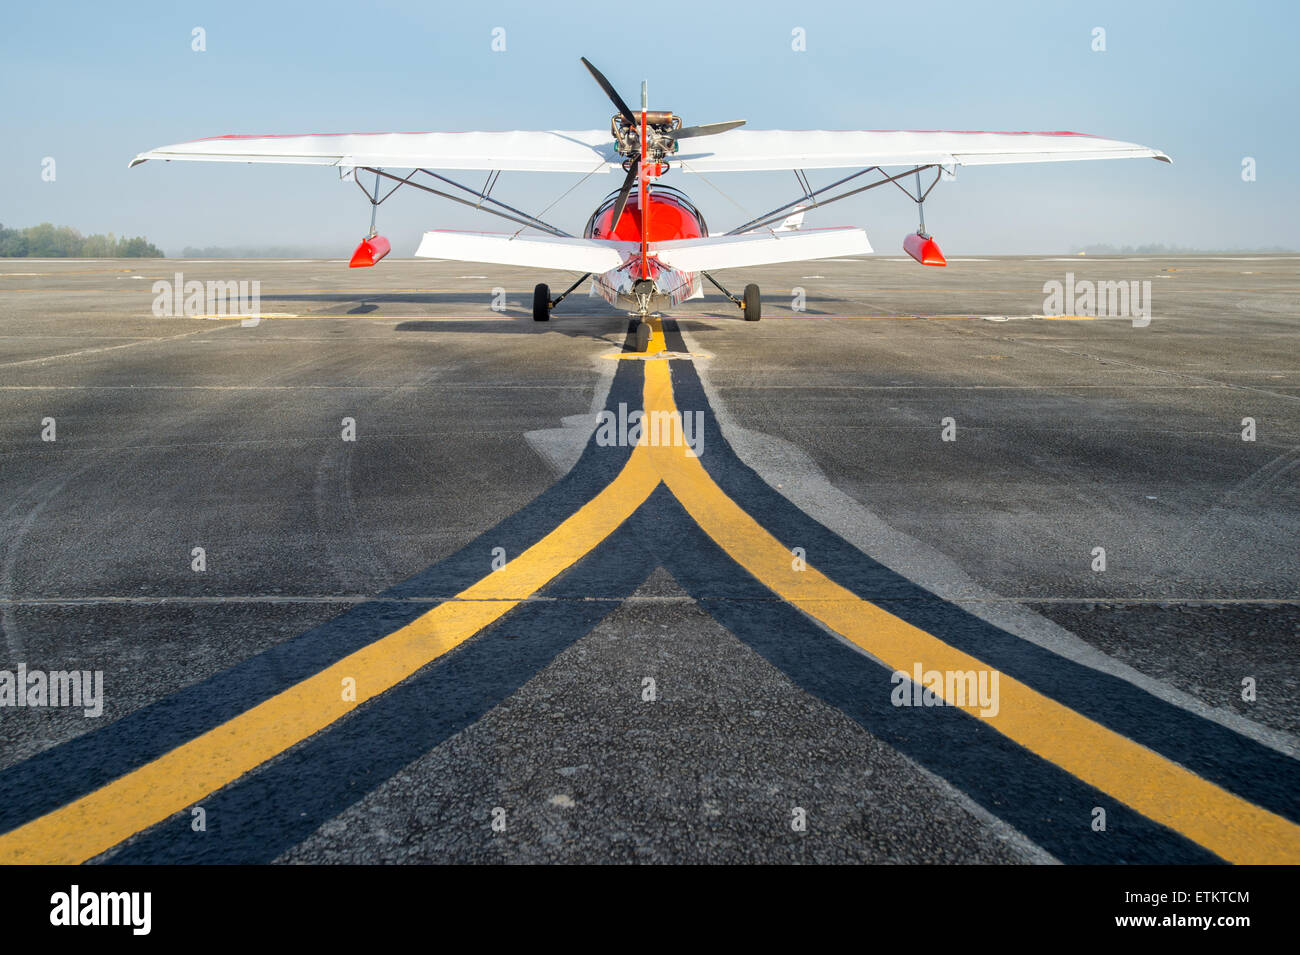 The rear side of a Searey seaplane sitting on the runway showing the painted runway lines  USA Stock Photo